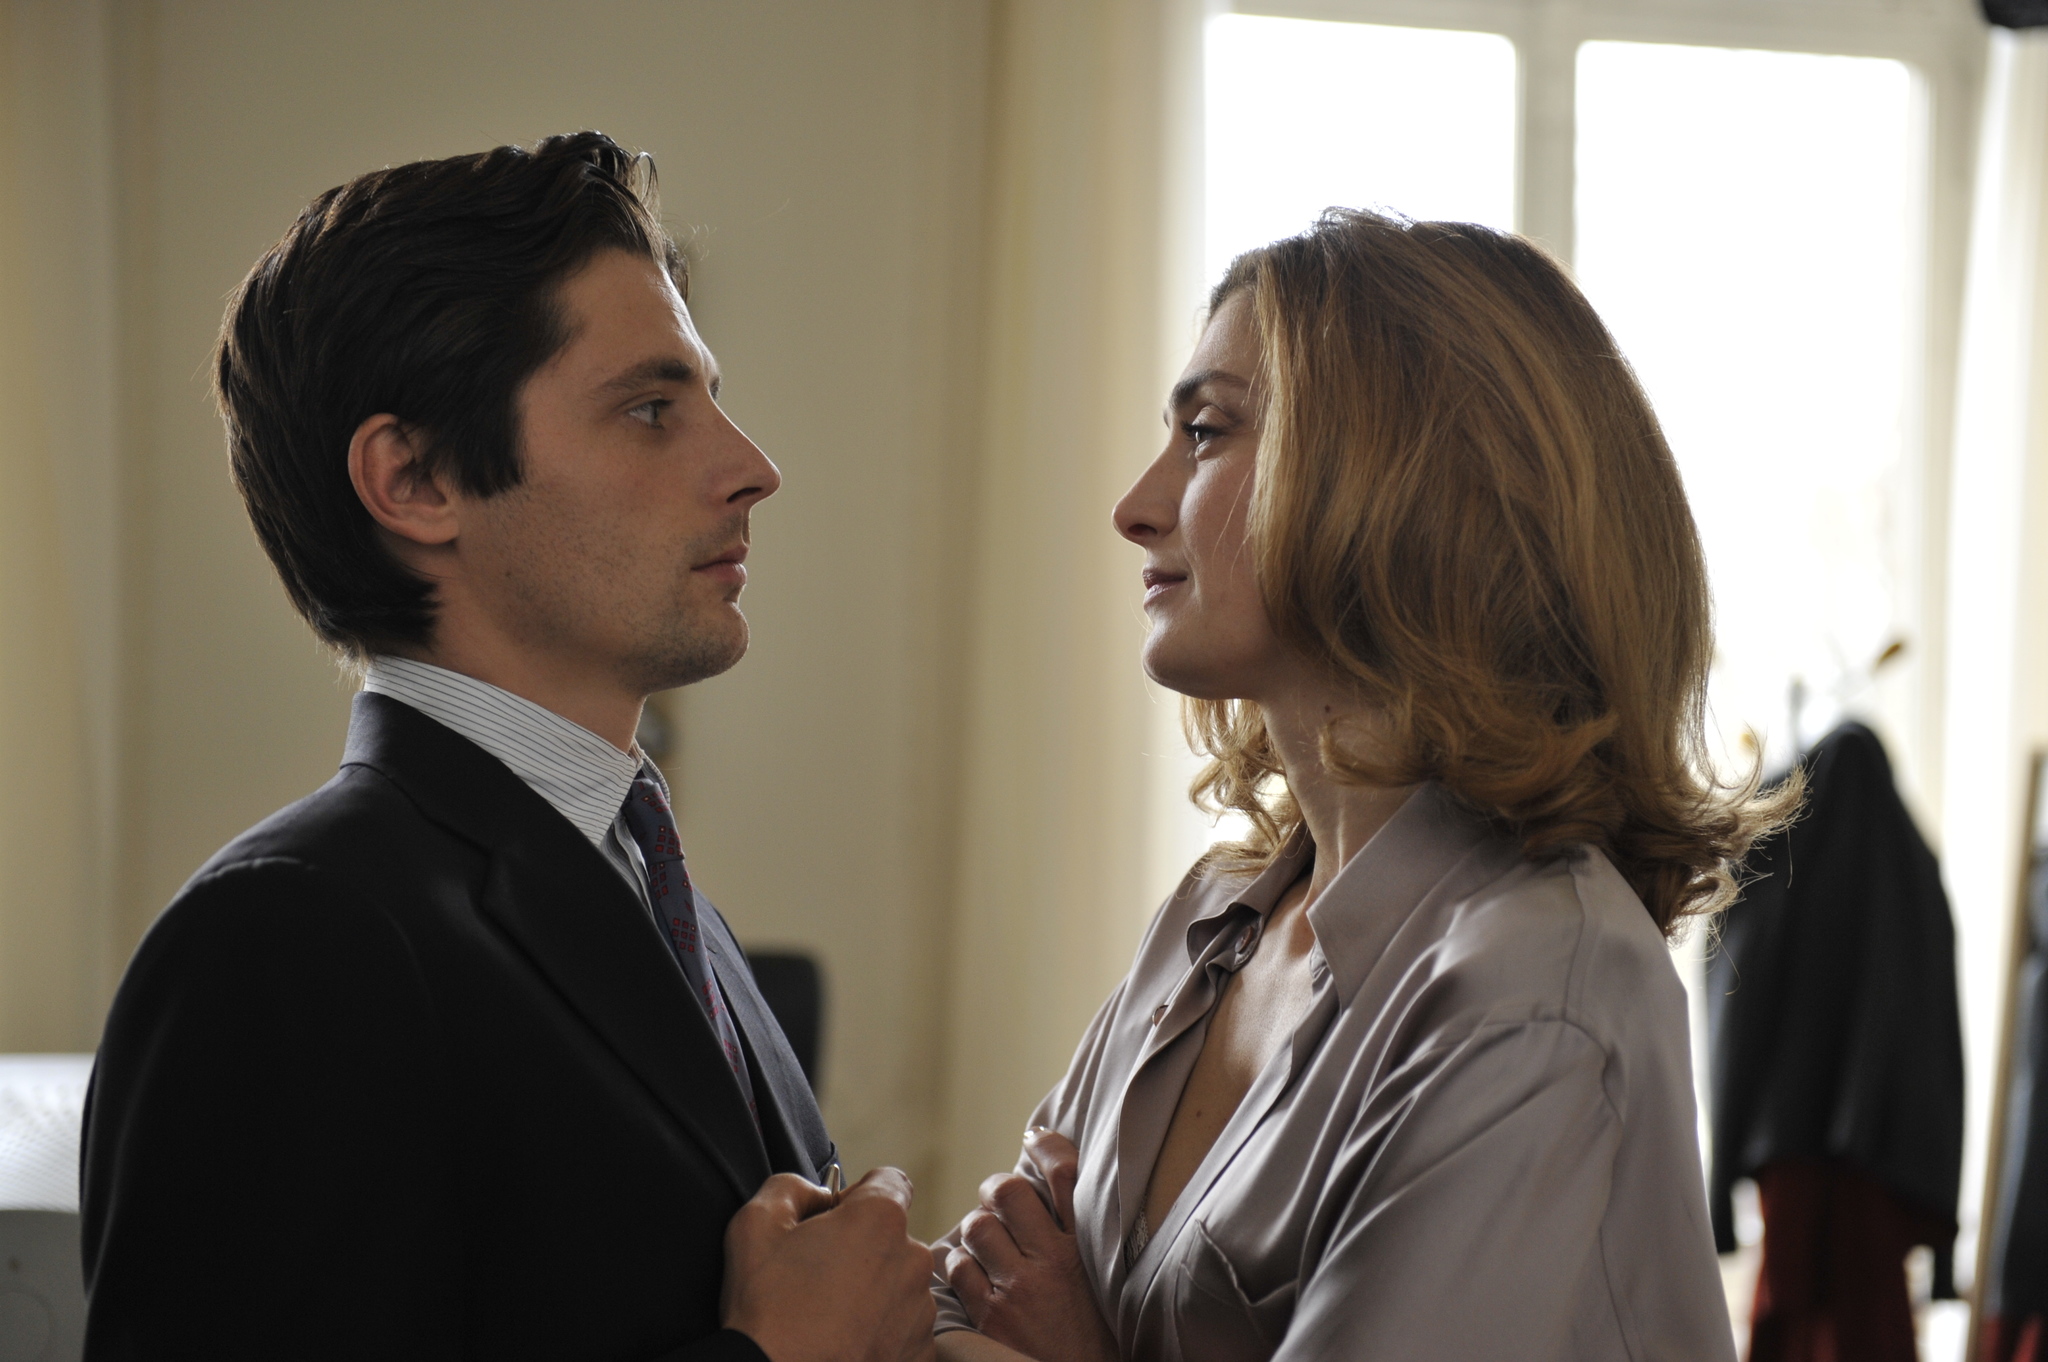 Still of Julie Gayet and Raphaël Personnaz in Quai d'Orsay (2013)